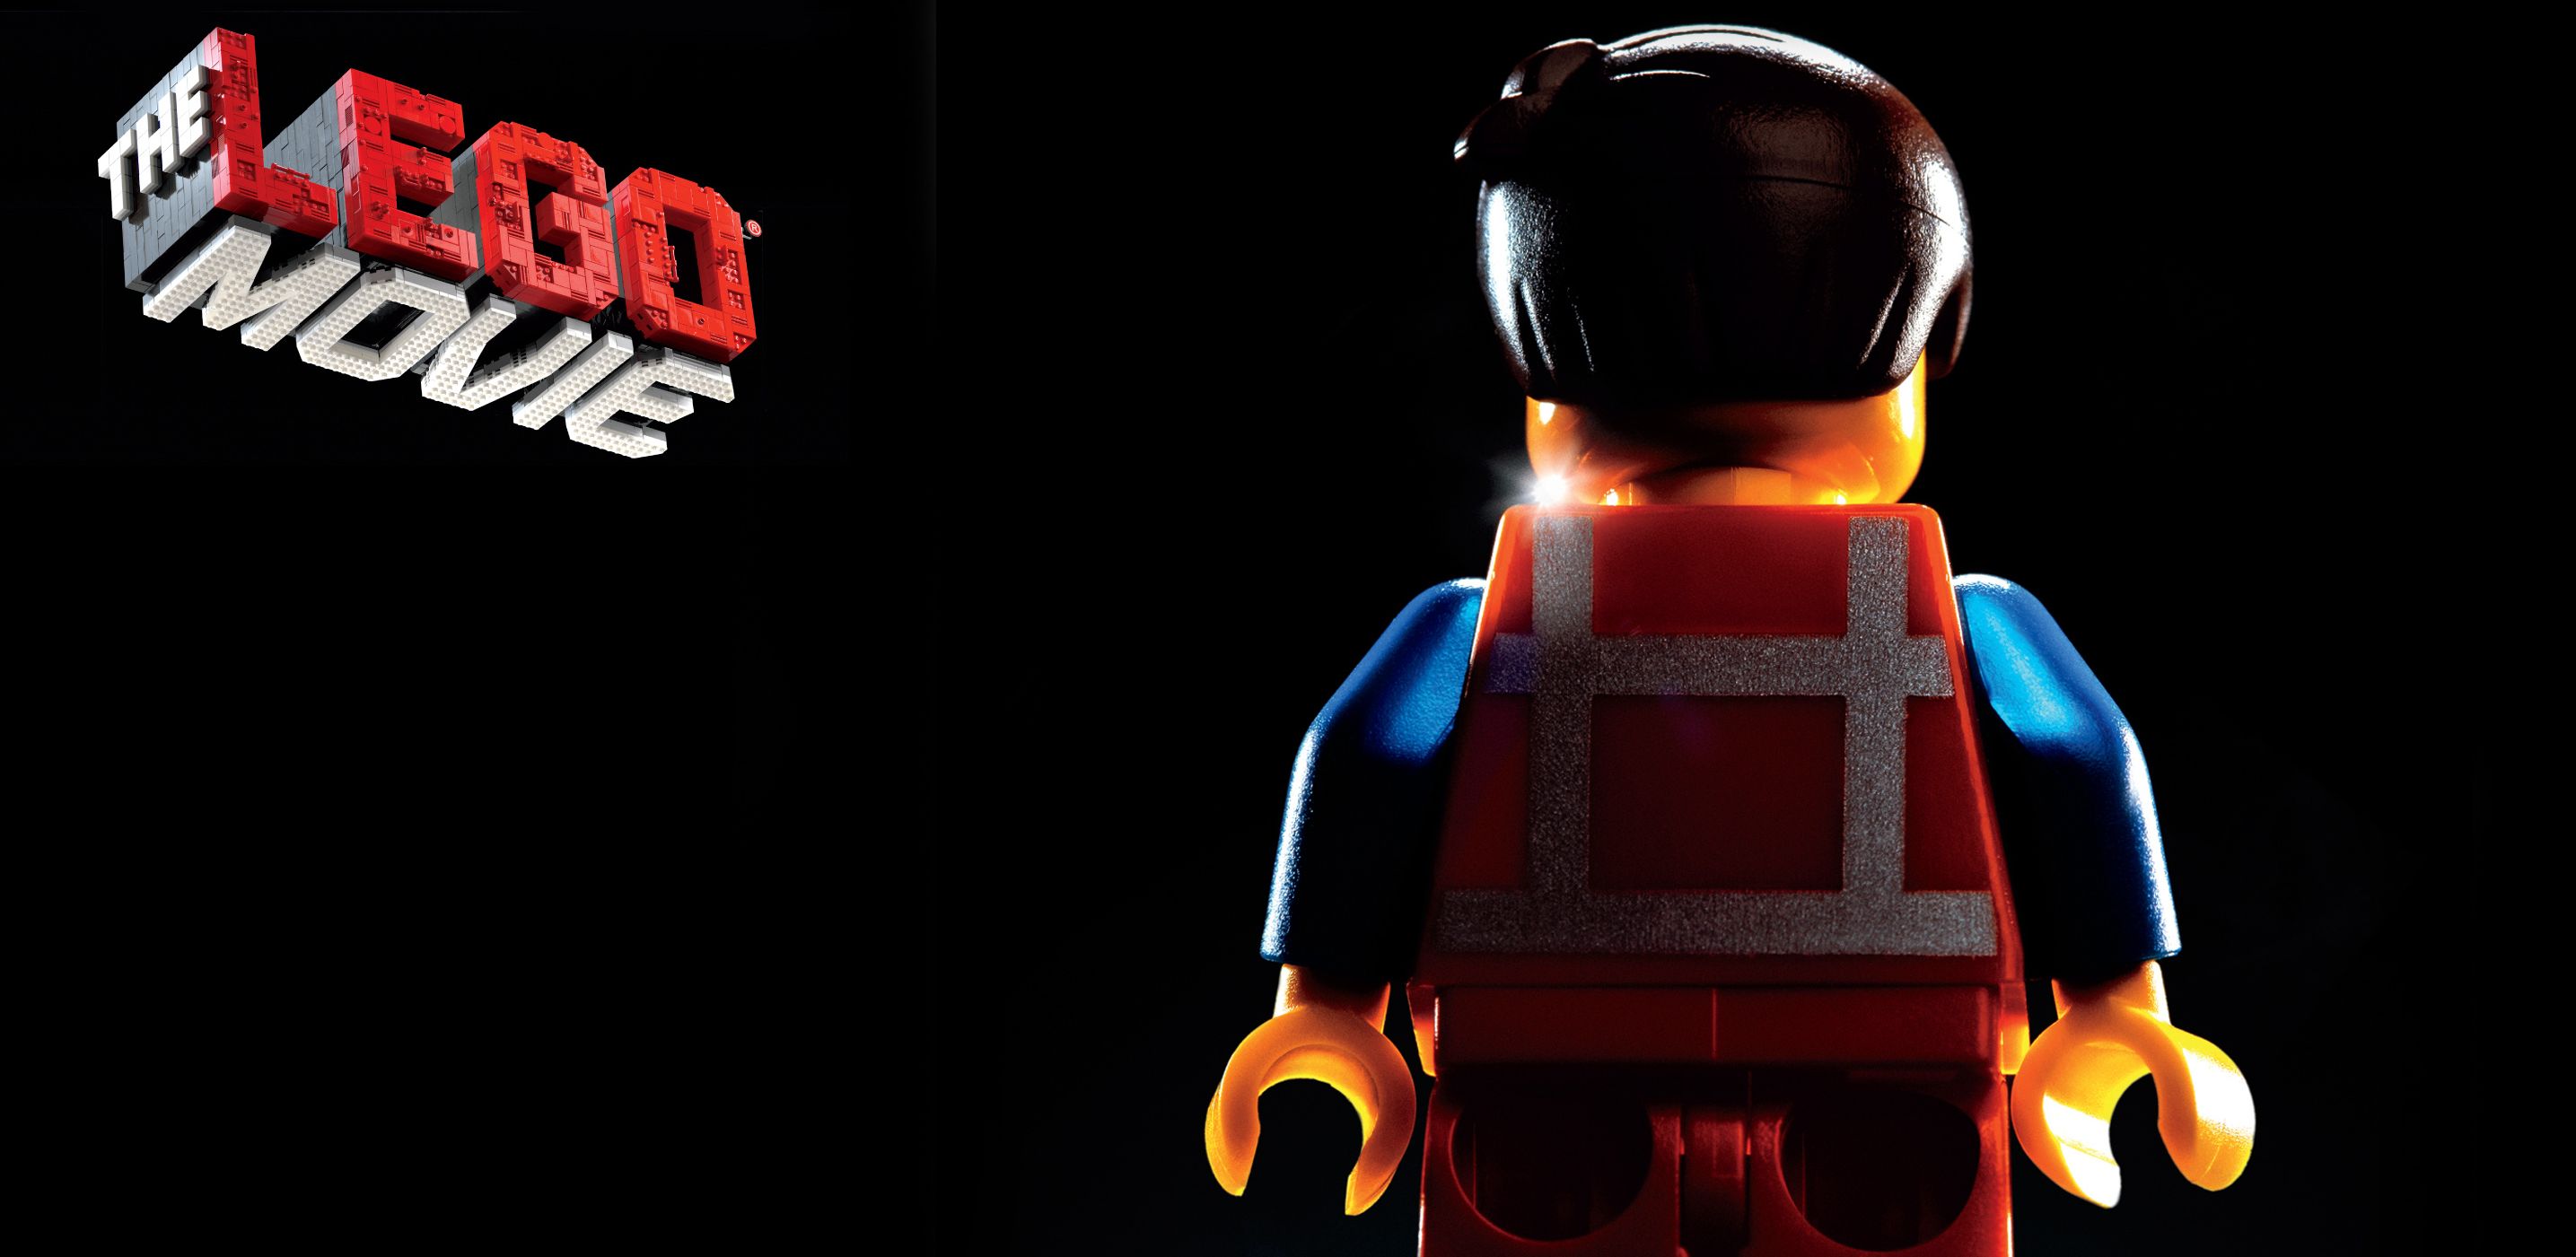 Box Office: The LEGO Movie continues it's dominance